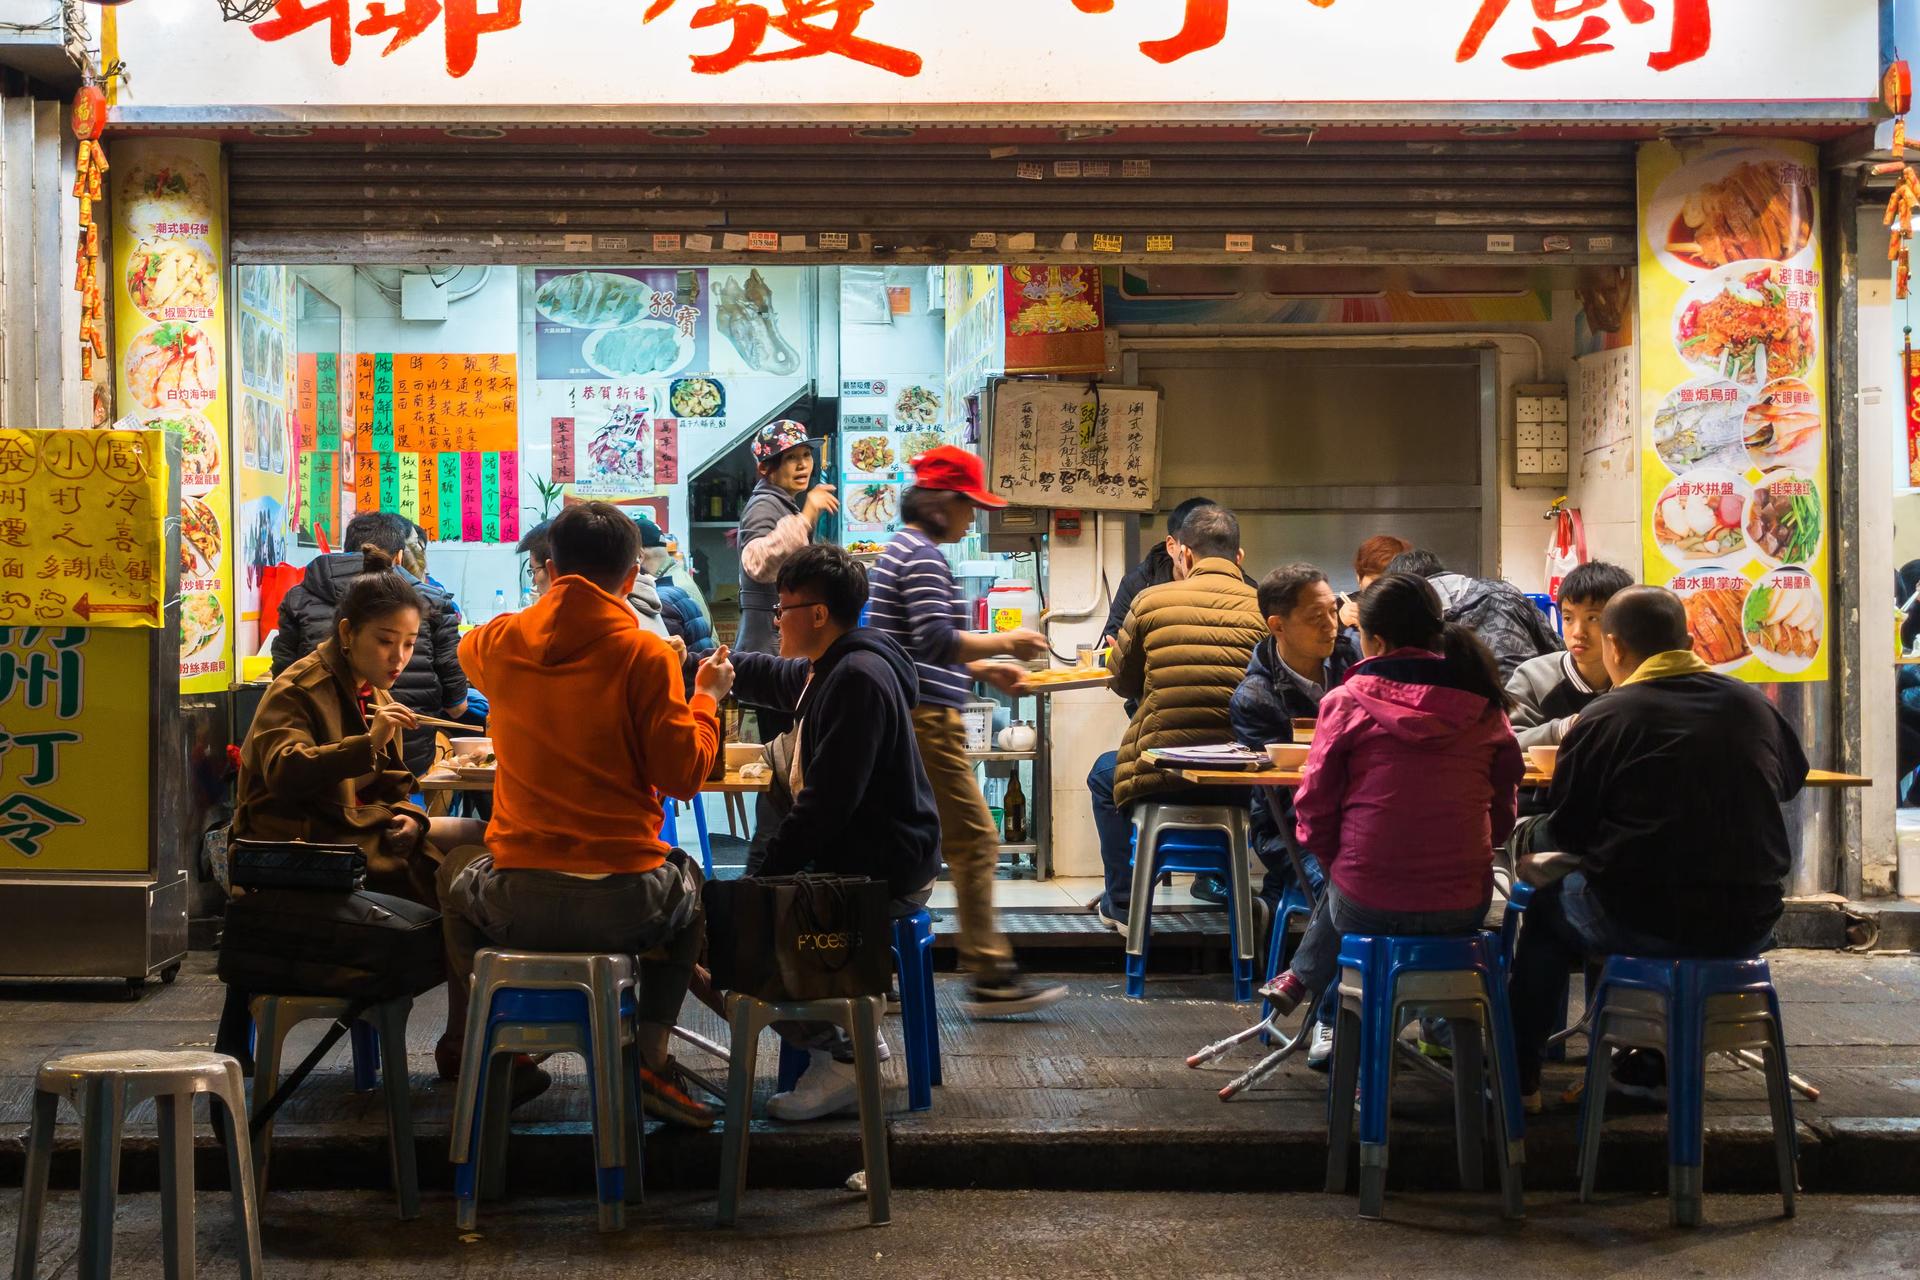 People eating in a street side cafe in Hong Kong